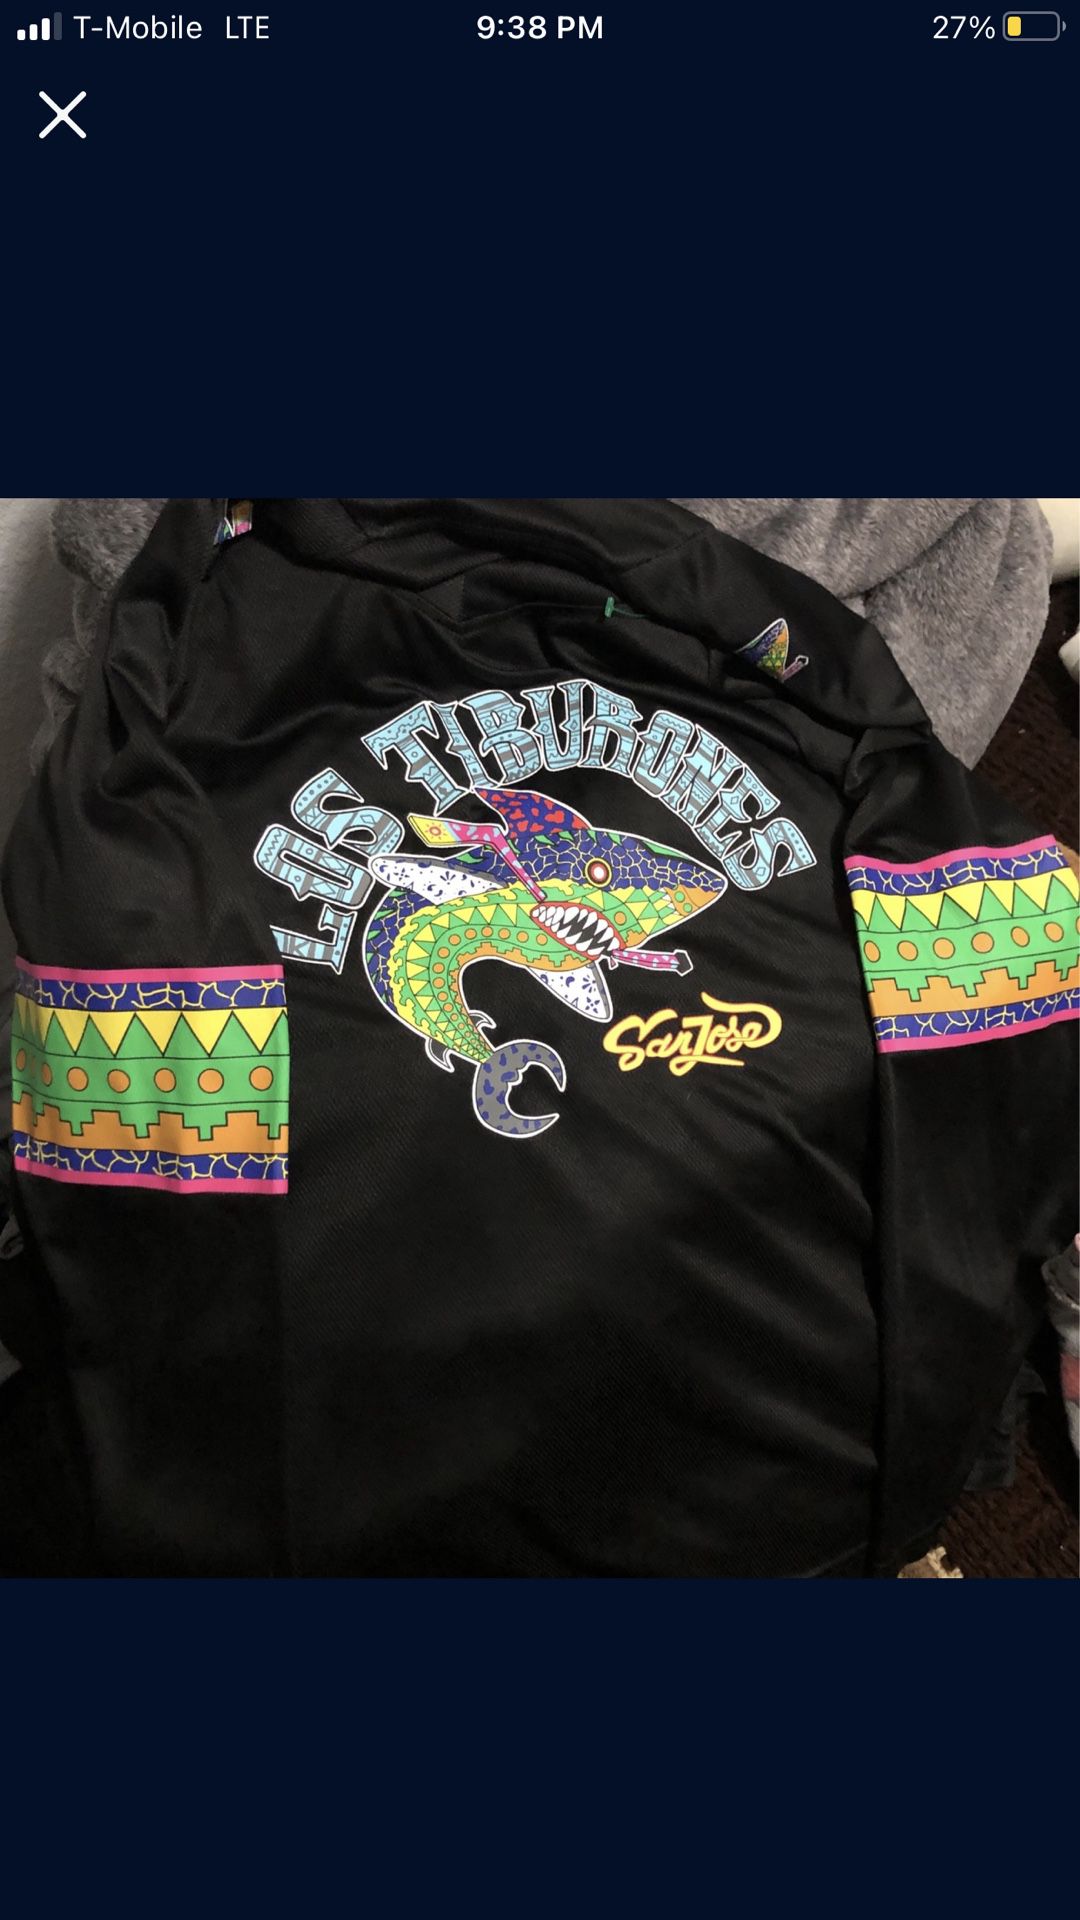 Sharks warriors mashup jersey for Sale in San Jose, CA - OfferUp